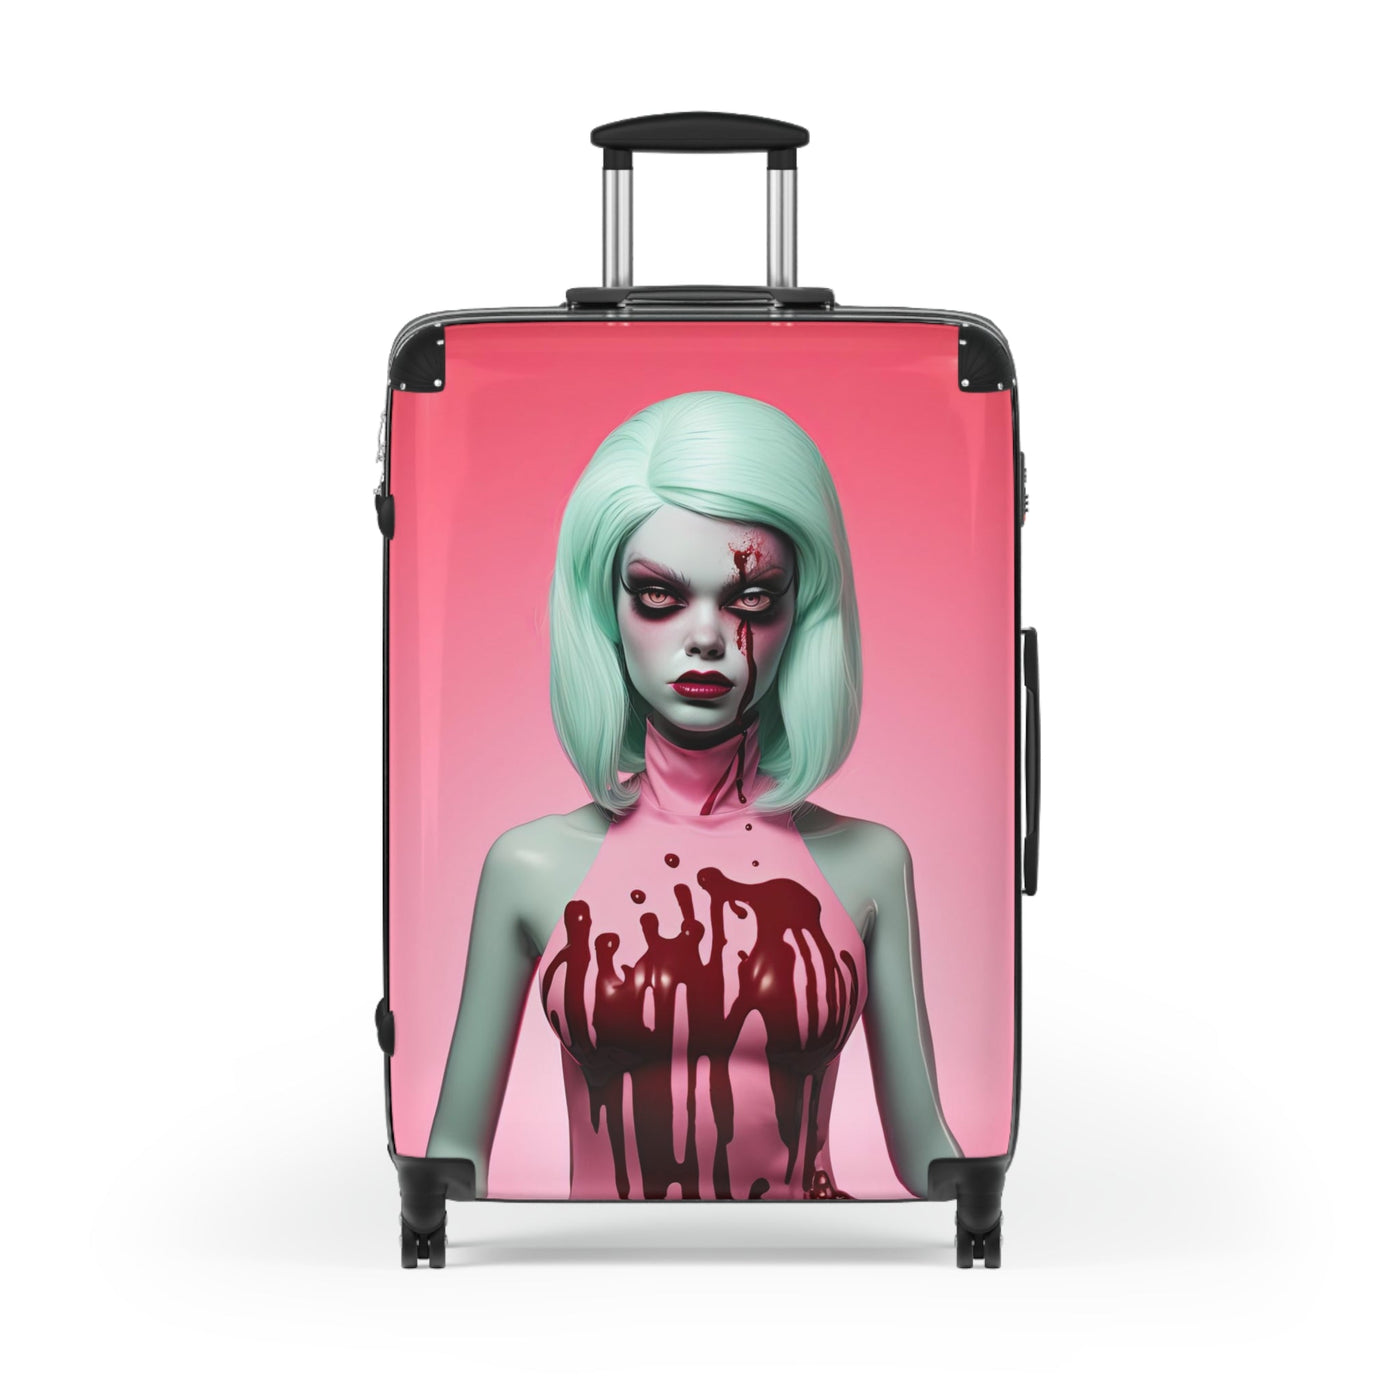 Scary Dead Doll Pop Surreal Travel Suitcase Luggage